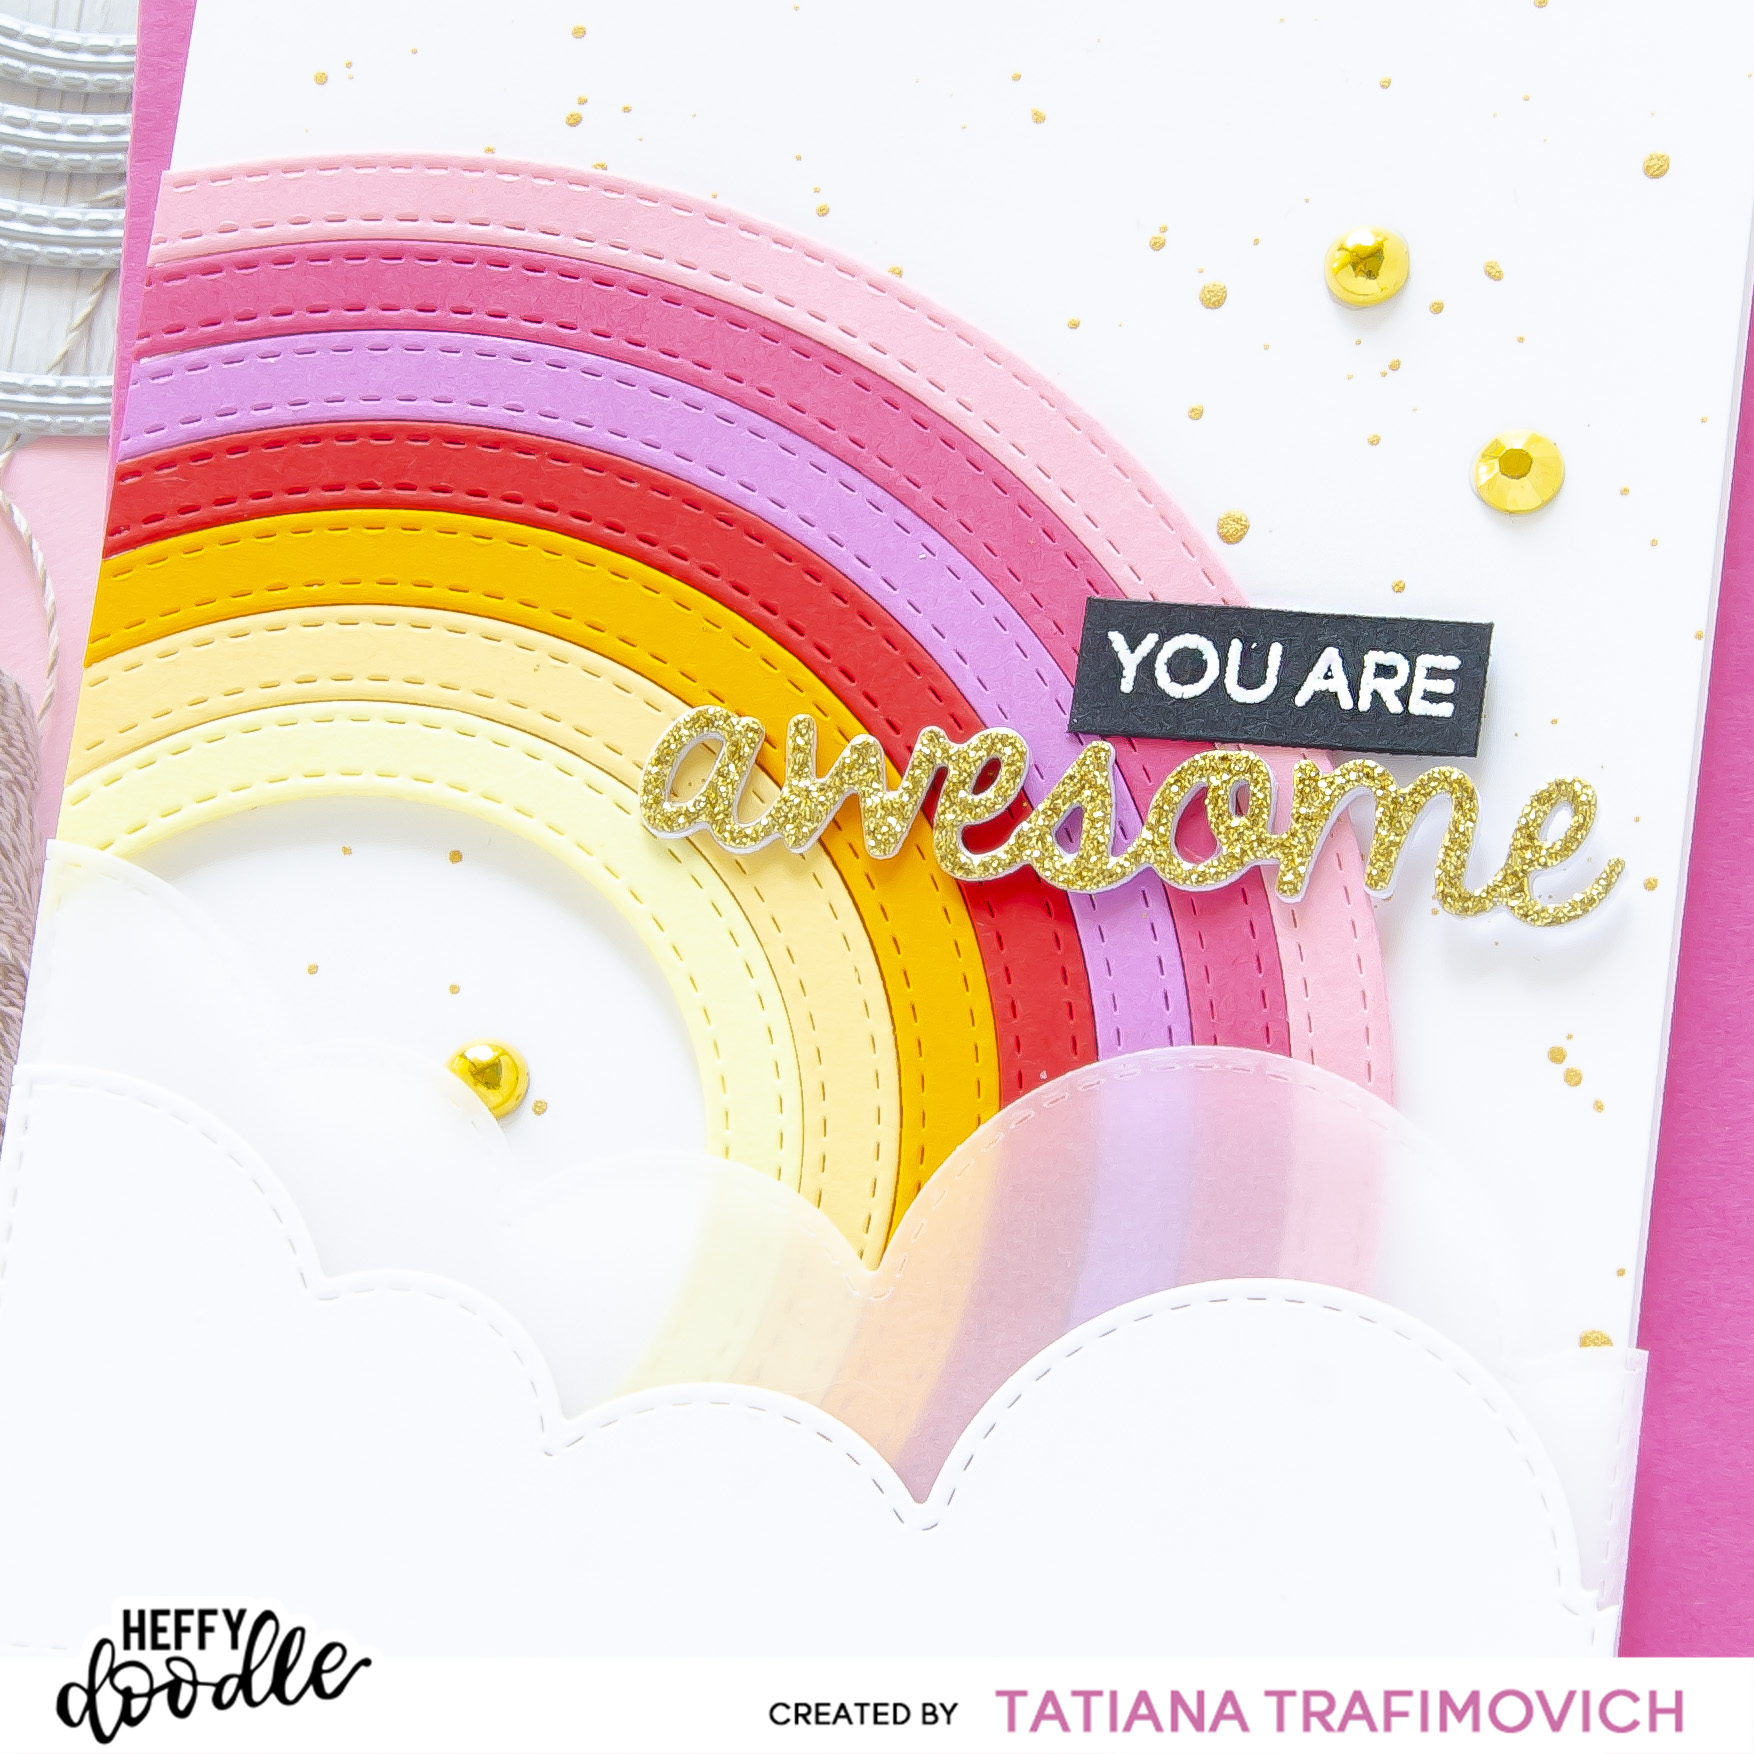 You Are AWESOME #handmade card by Tatiana Trafimovich #tatianacraftandart - Stitched Circles Dies by Heffy Doodle #heffydoodle